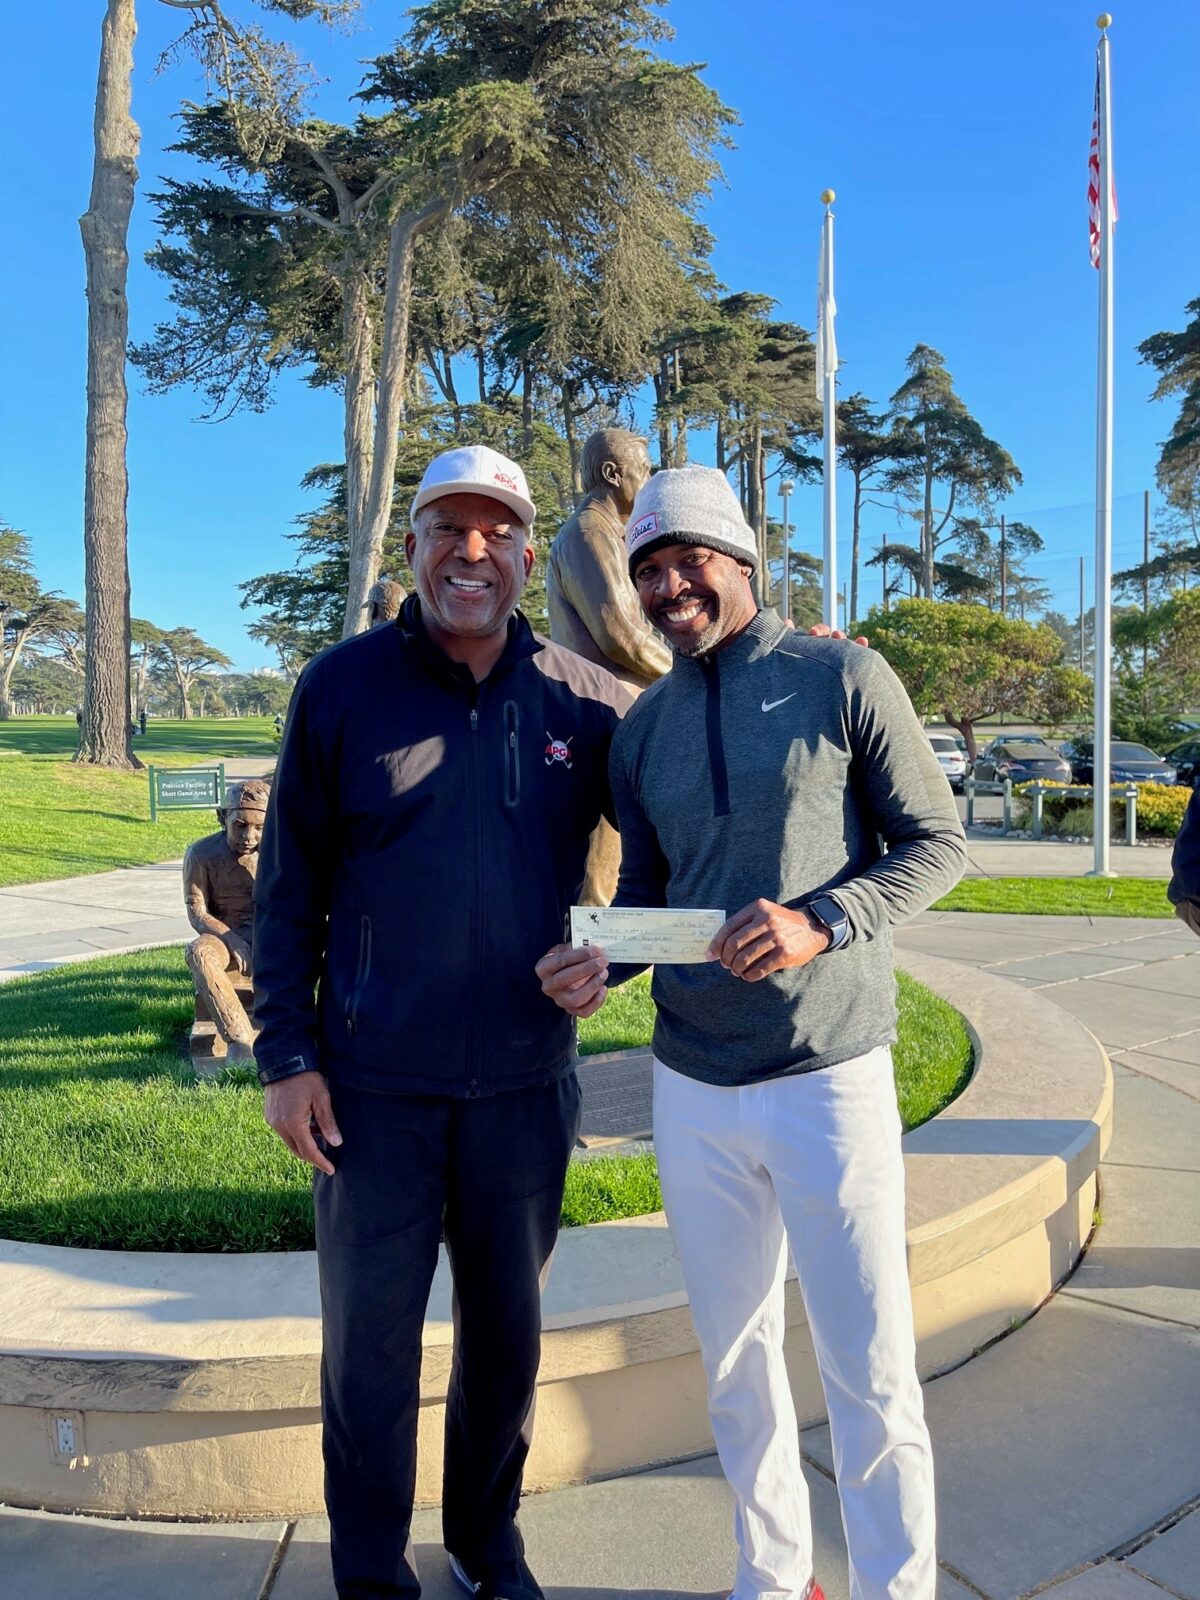 Tim O’Neal wins APGA Tour event at TPC Harding Park in dominating fashion